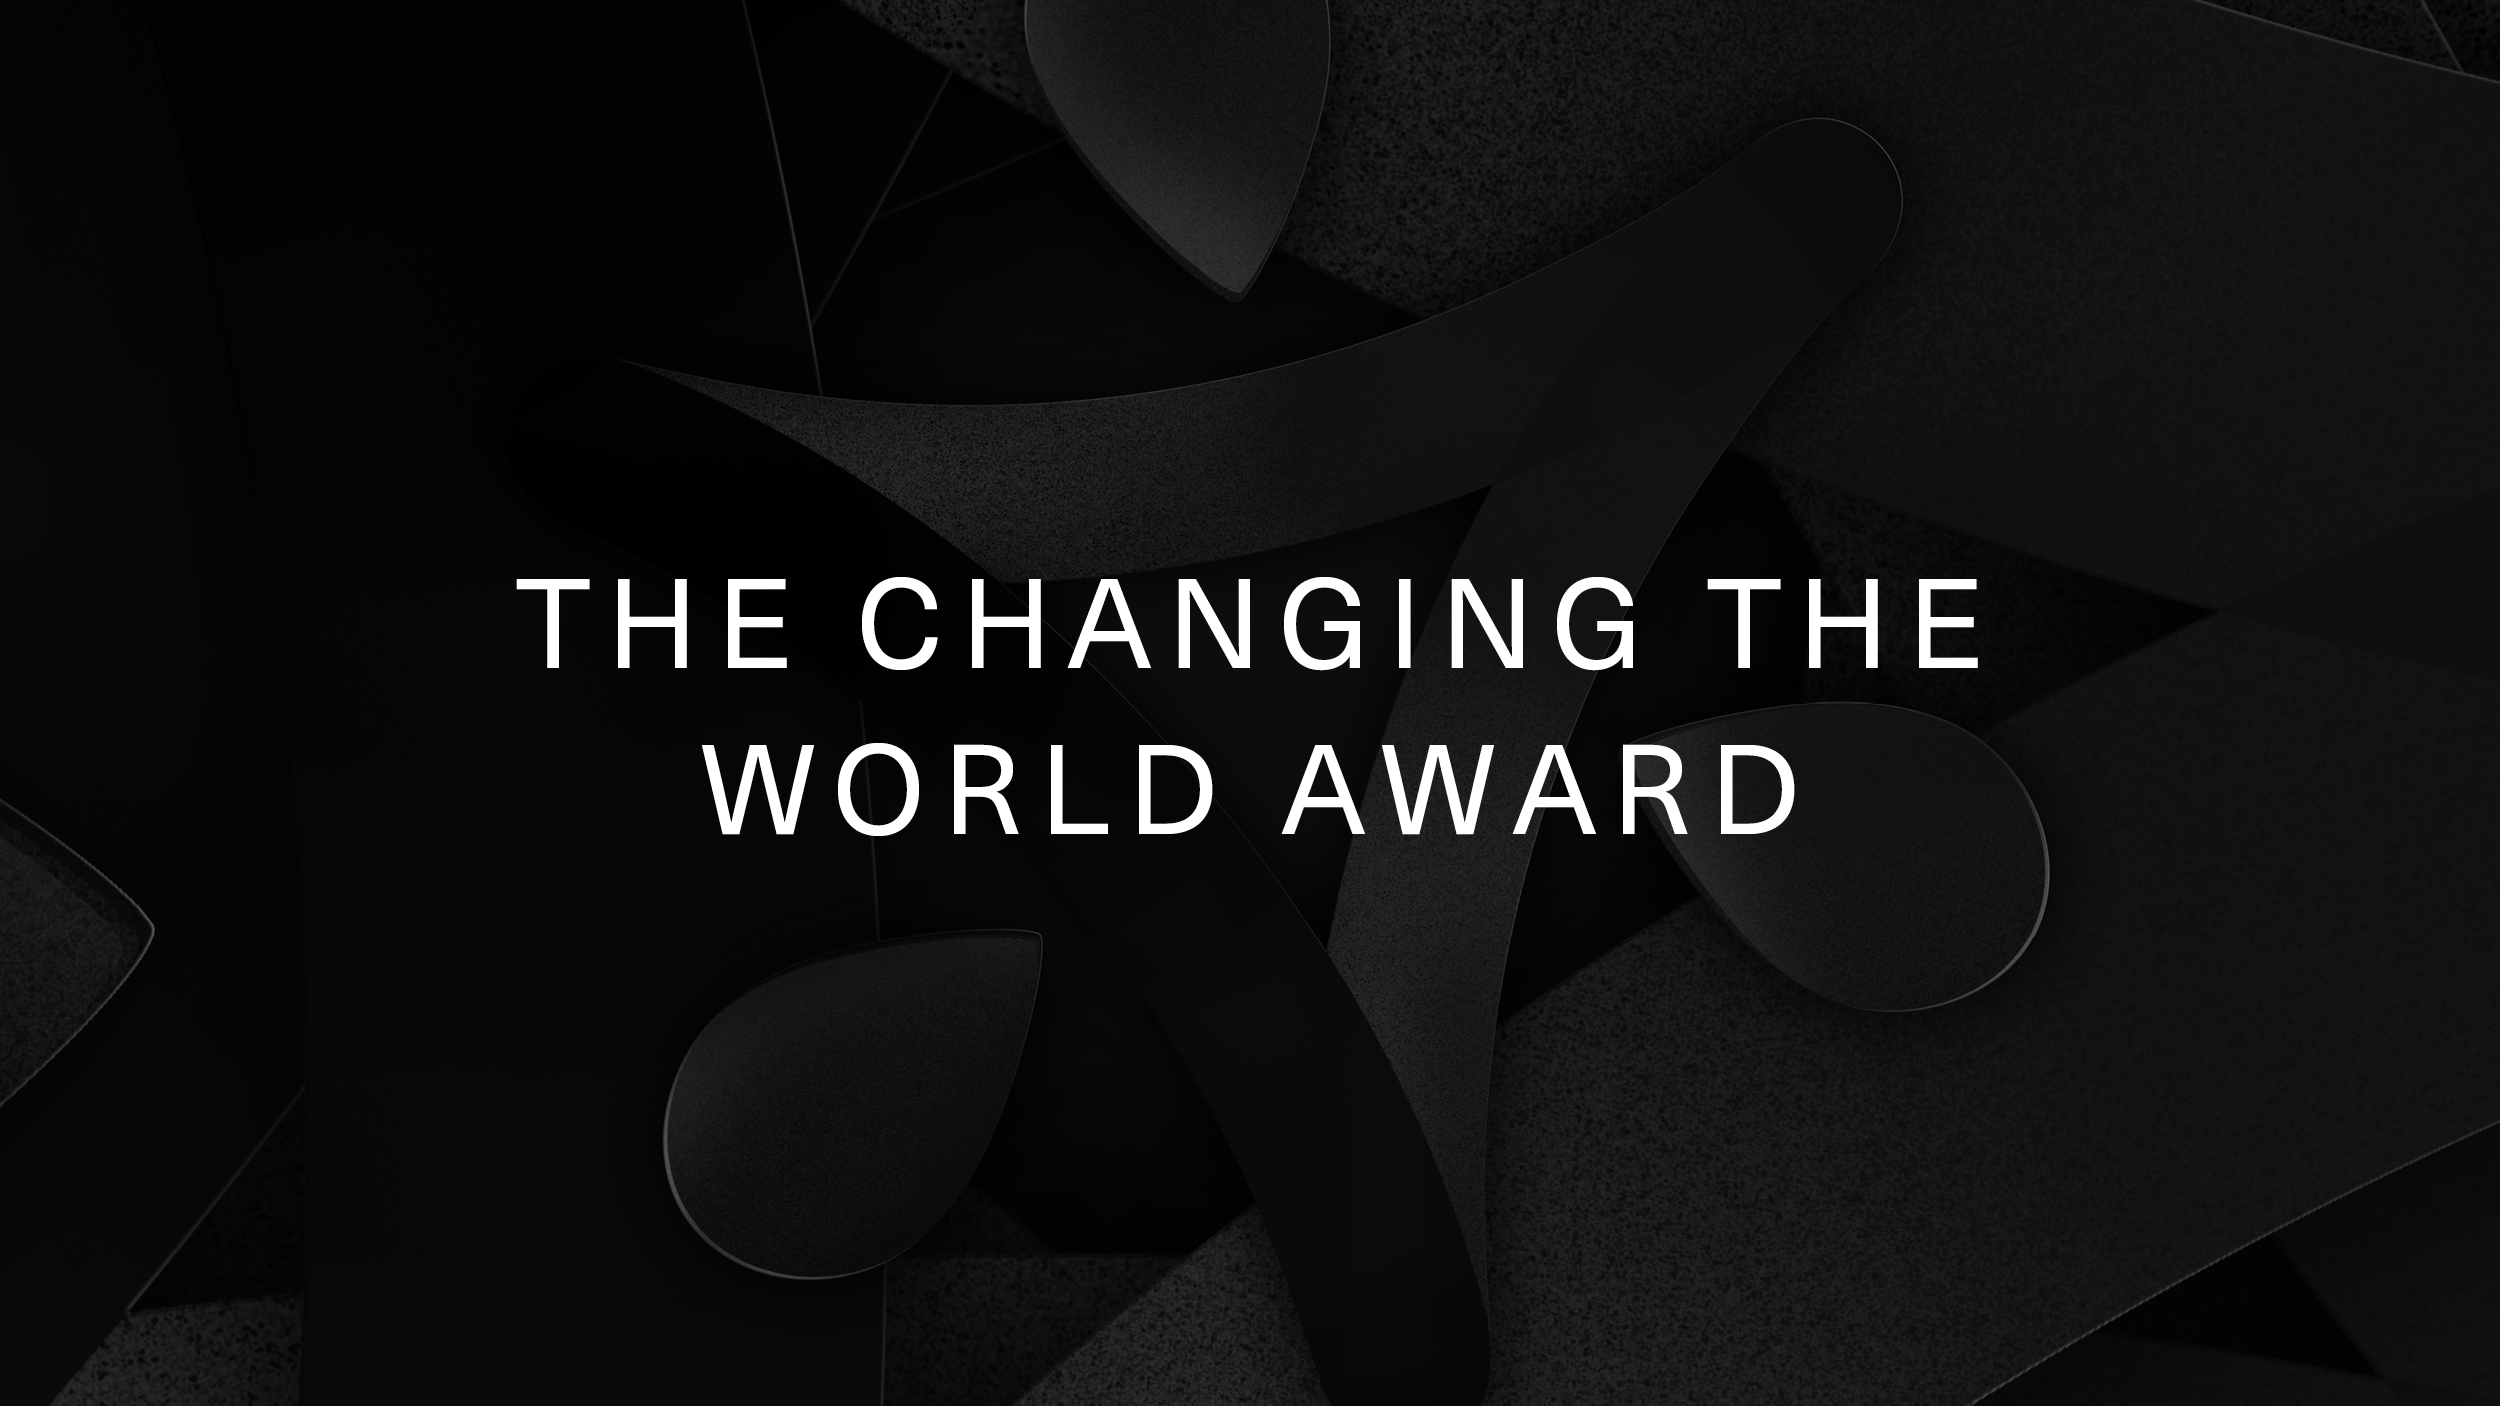 The Changing The World Award